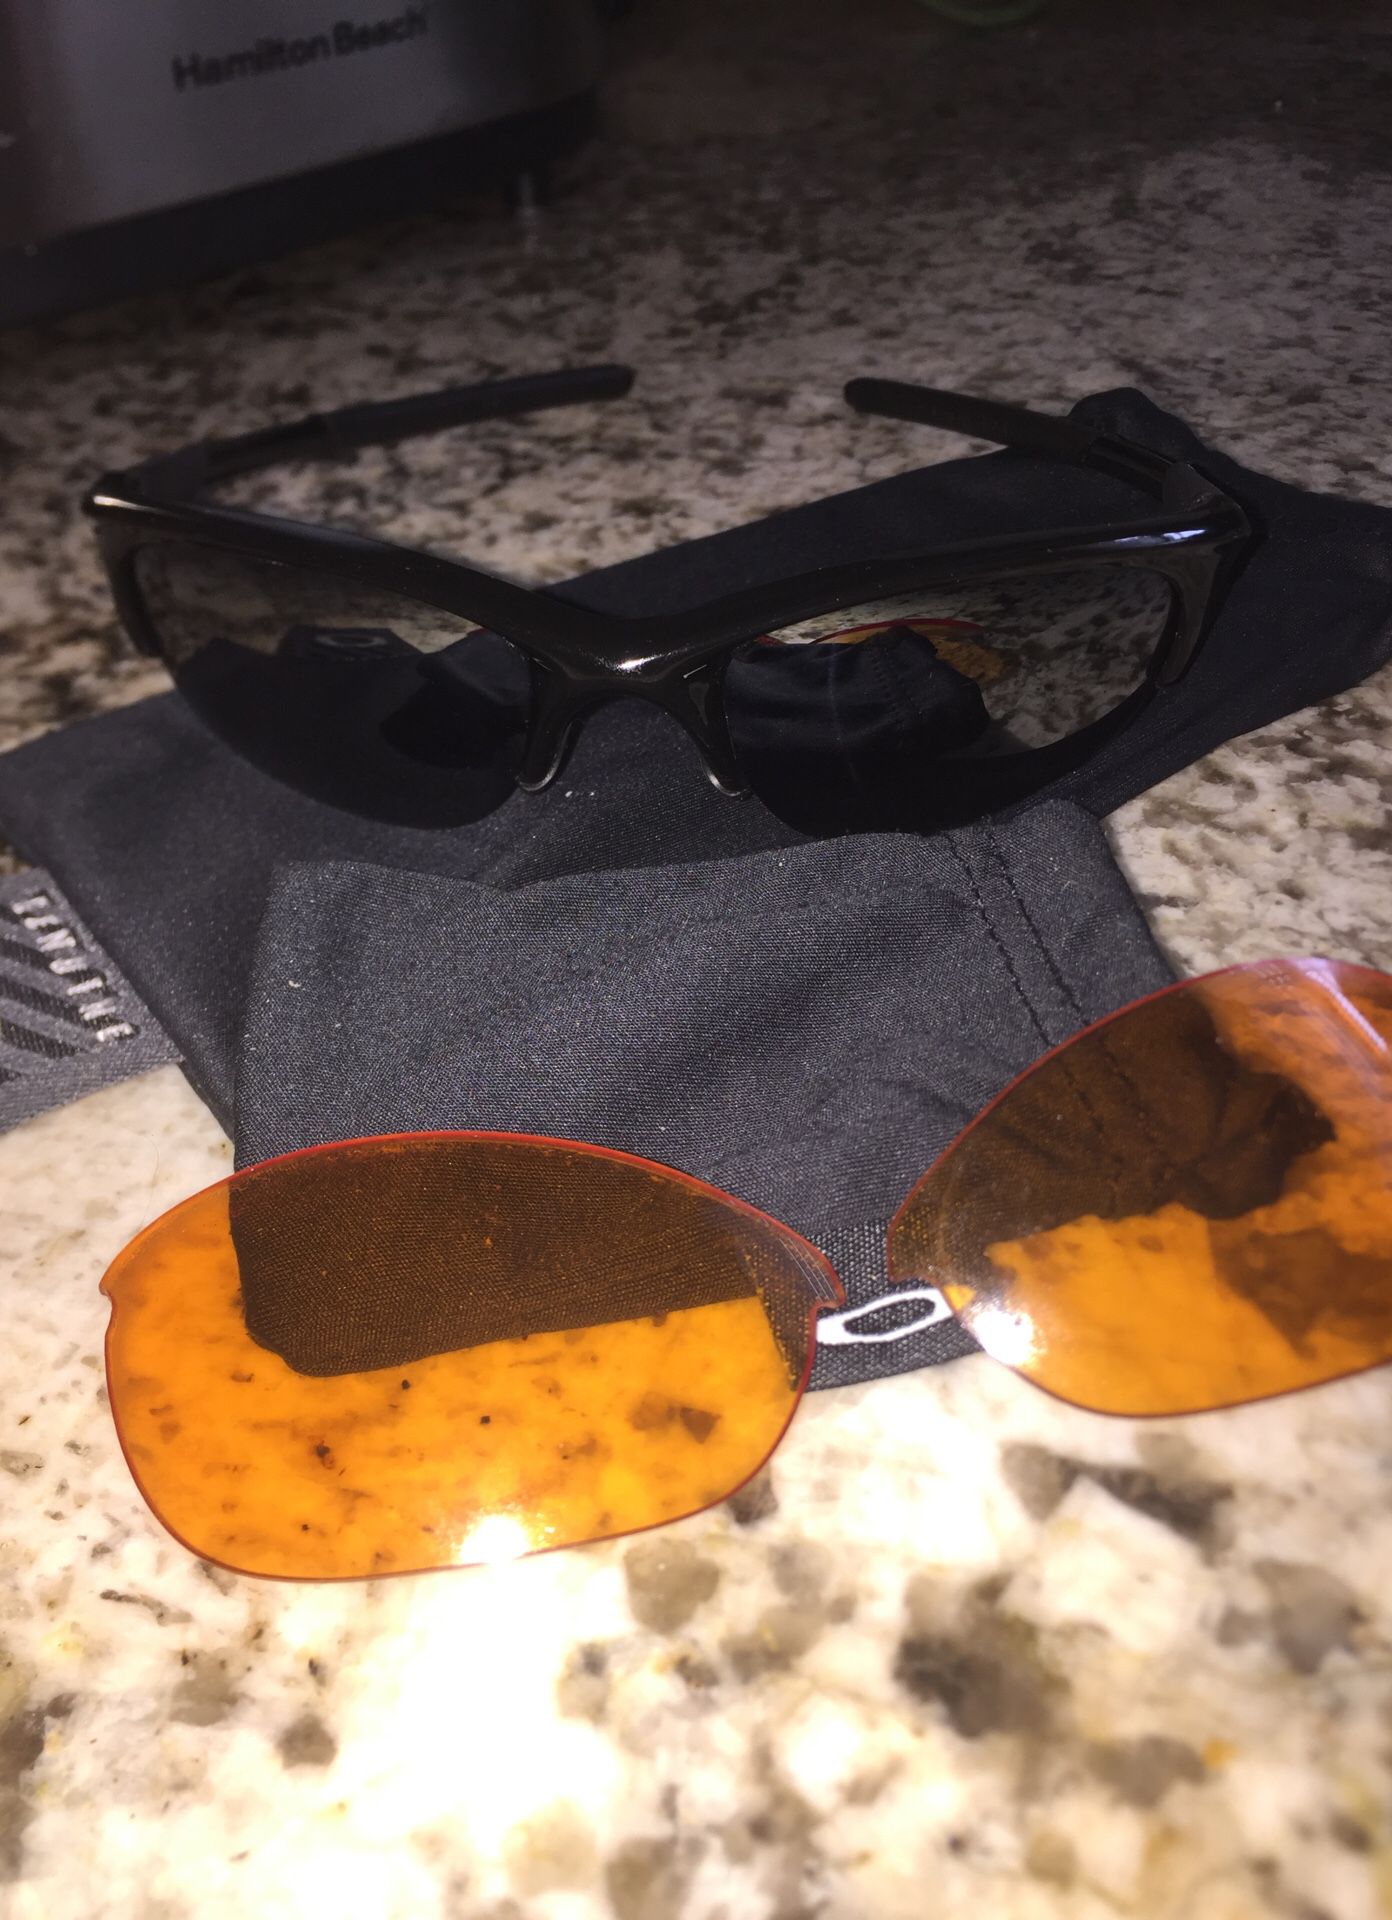 Men’s Oakley sunglasses with interchangeable lenses like new worn once or twice